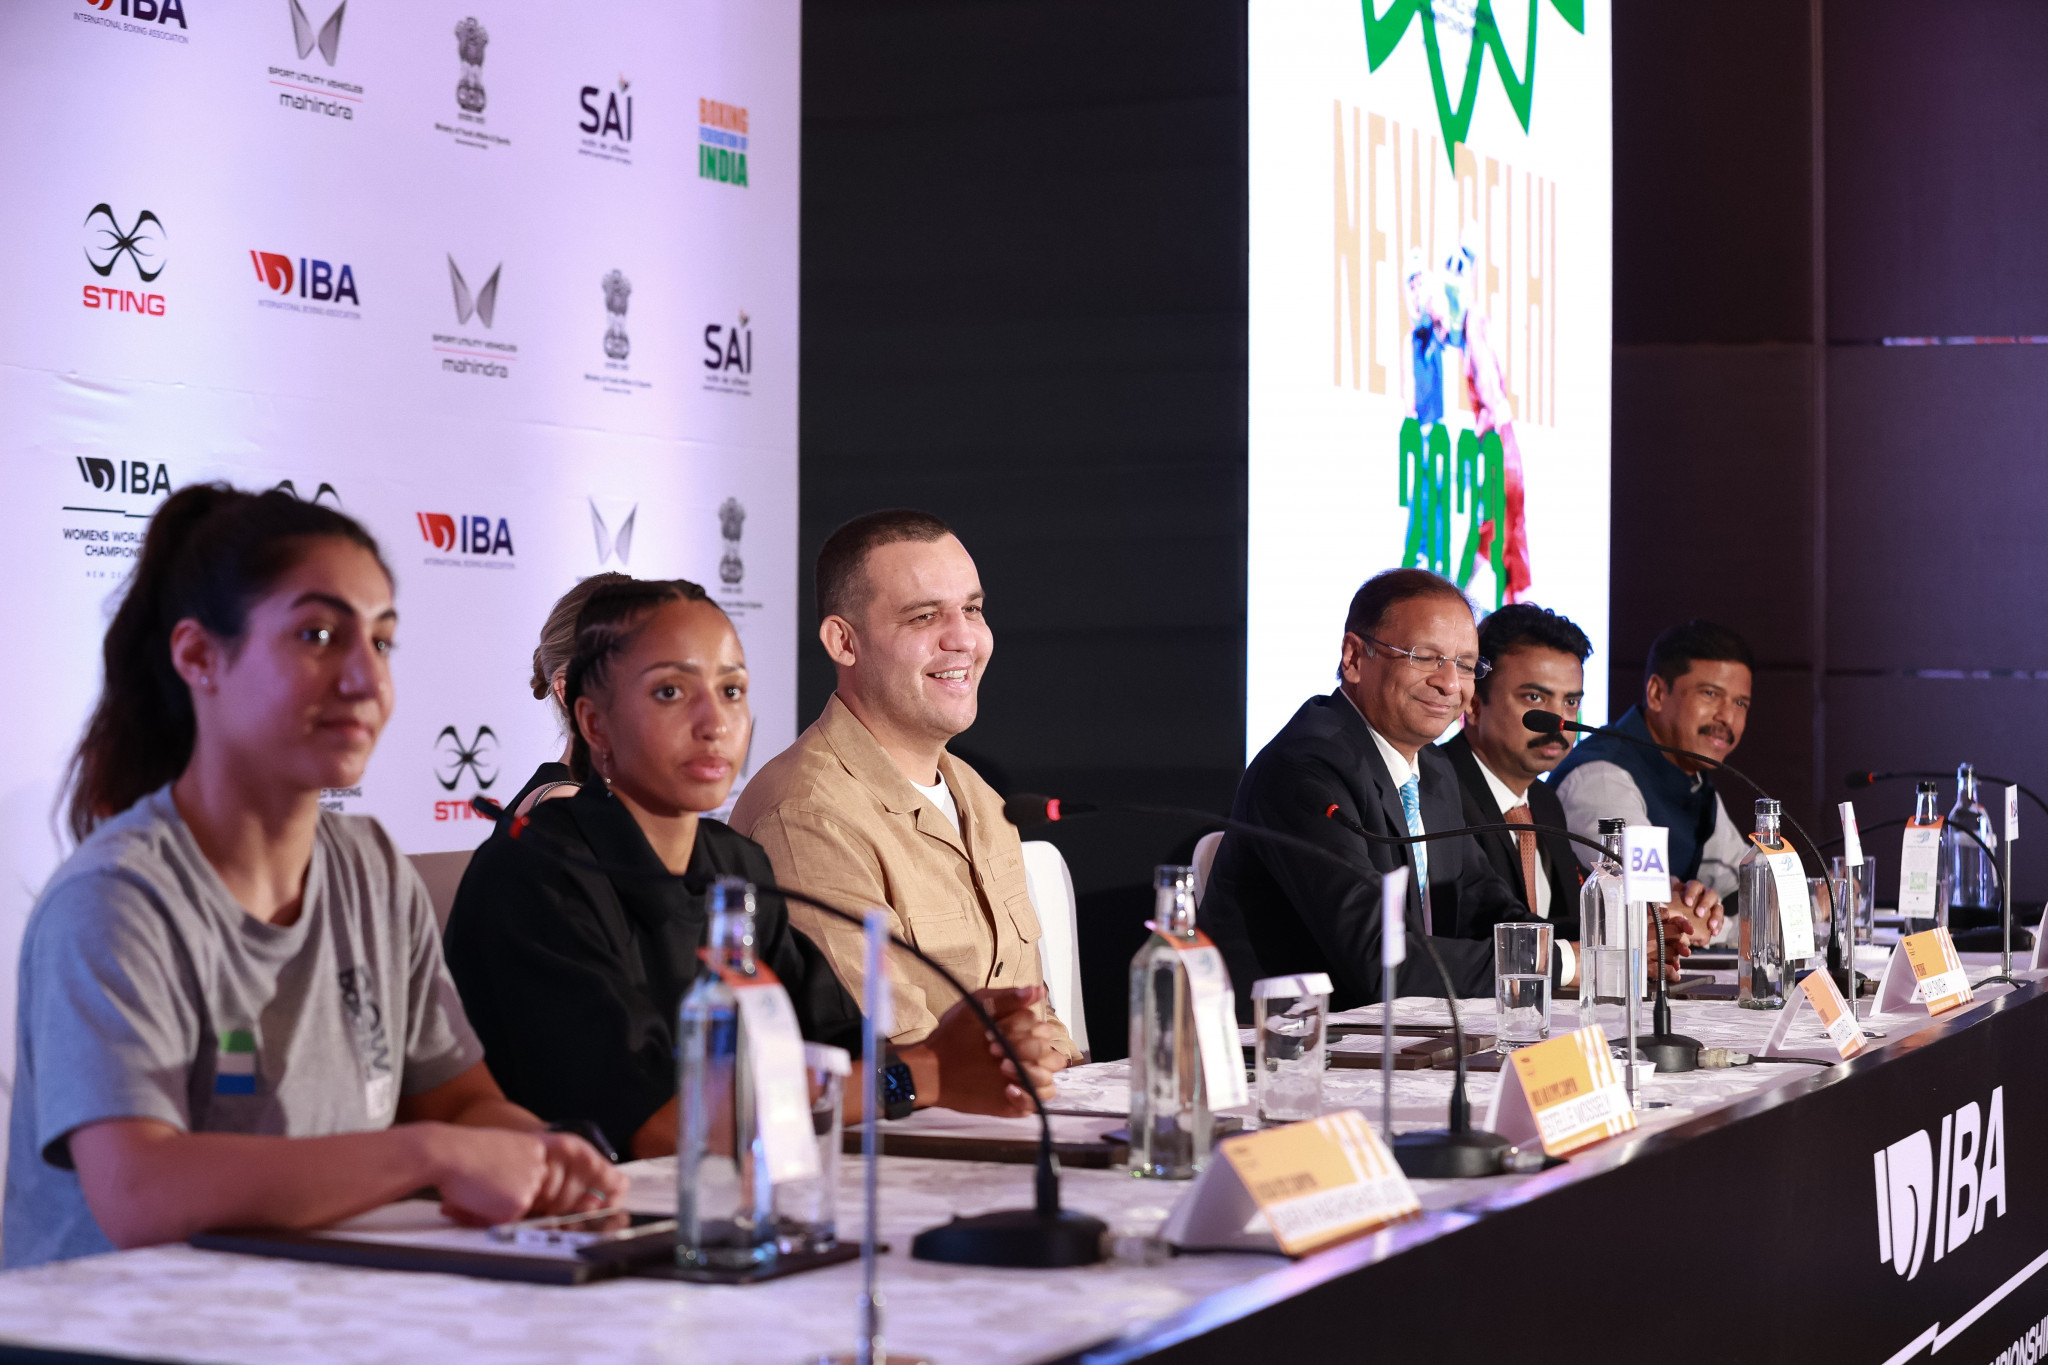 IBA President Umar Kremlev staged a media conference before the Women's World Championships which has been overshadowed by a series of withdrawals from national governing bodies ©IBA